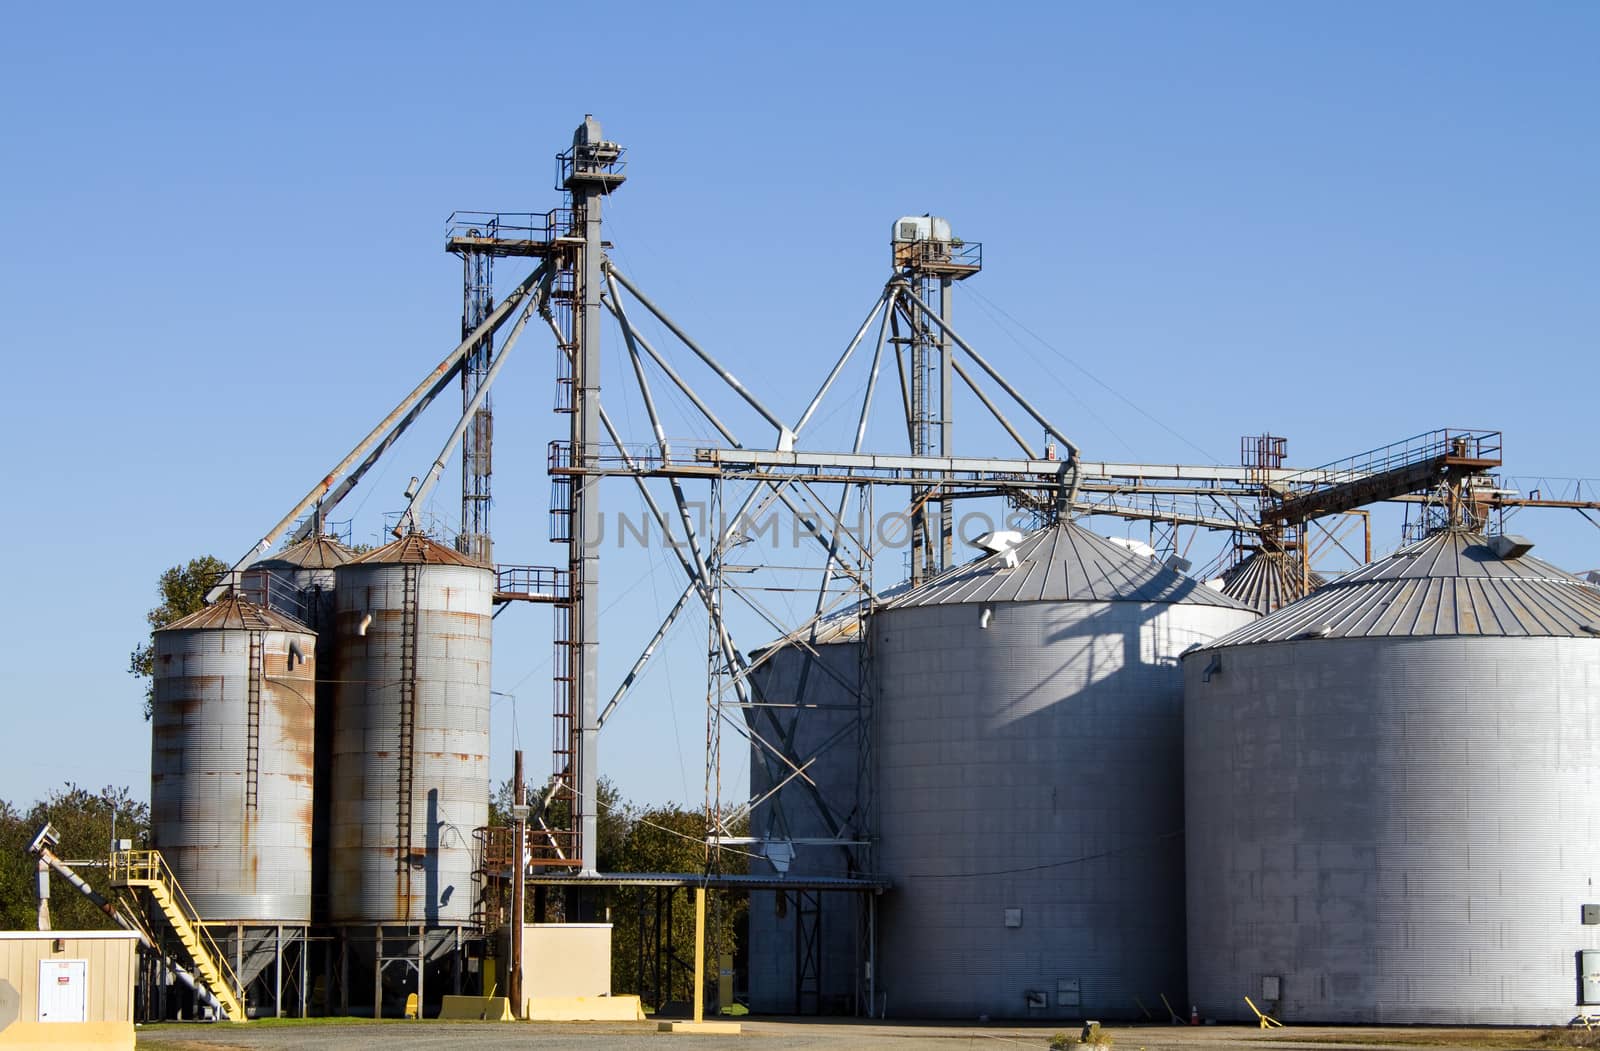 Grain storage silos with elevator equipment to move bulk crops to the containers.